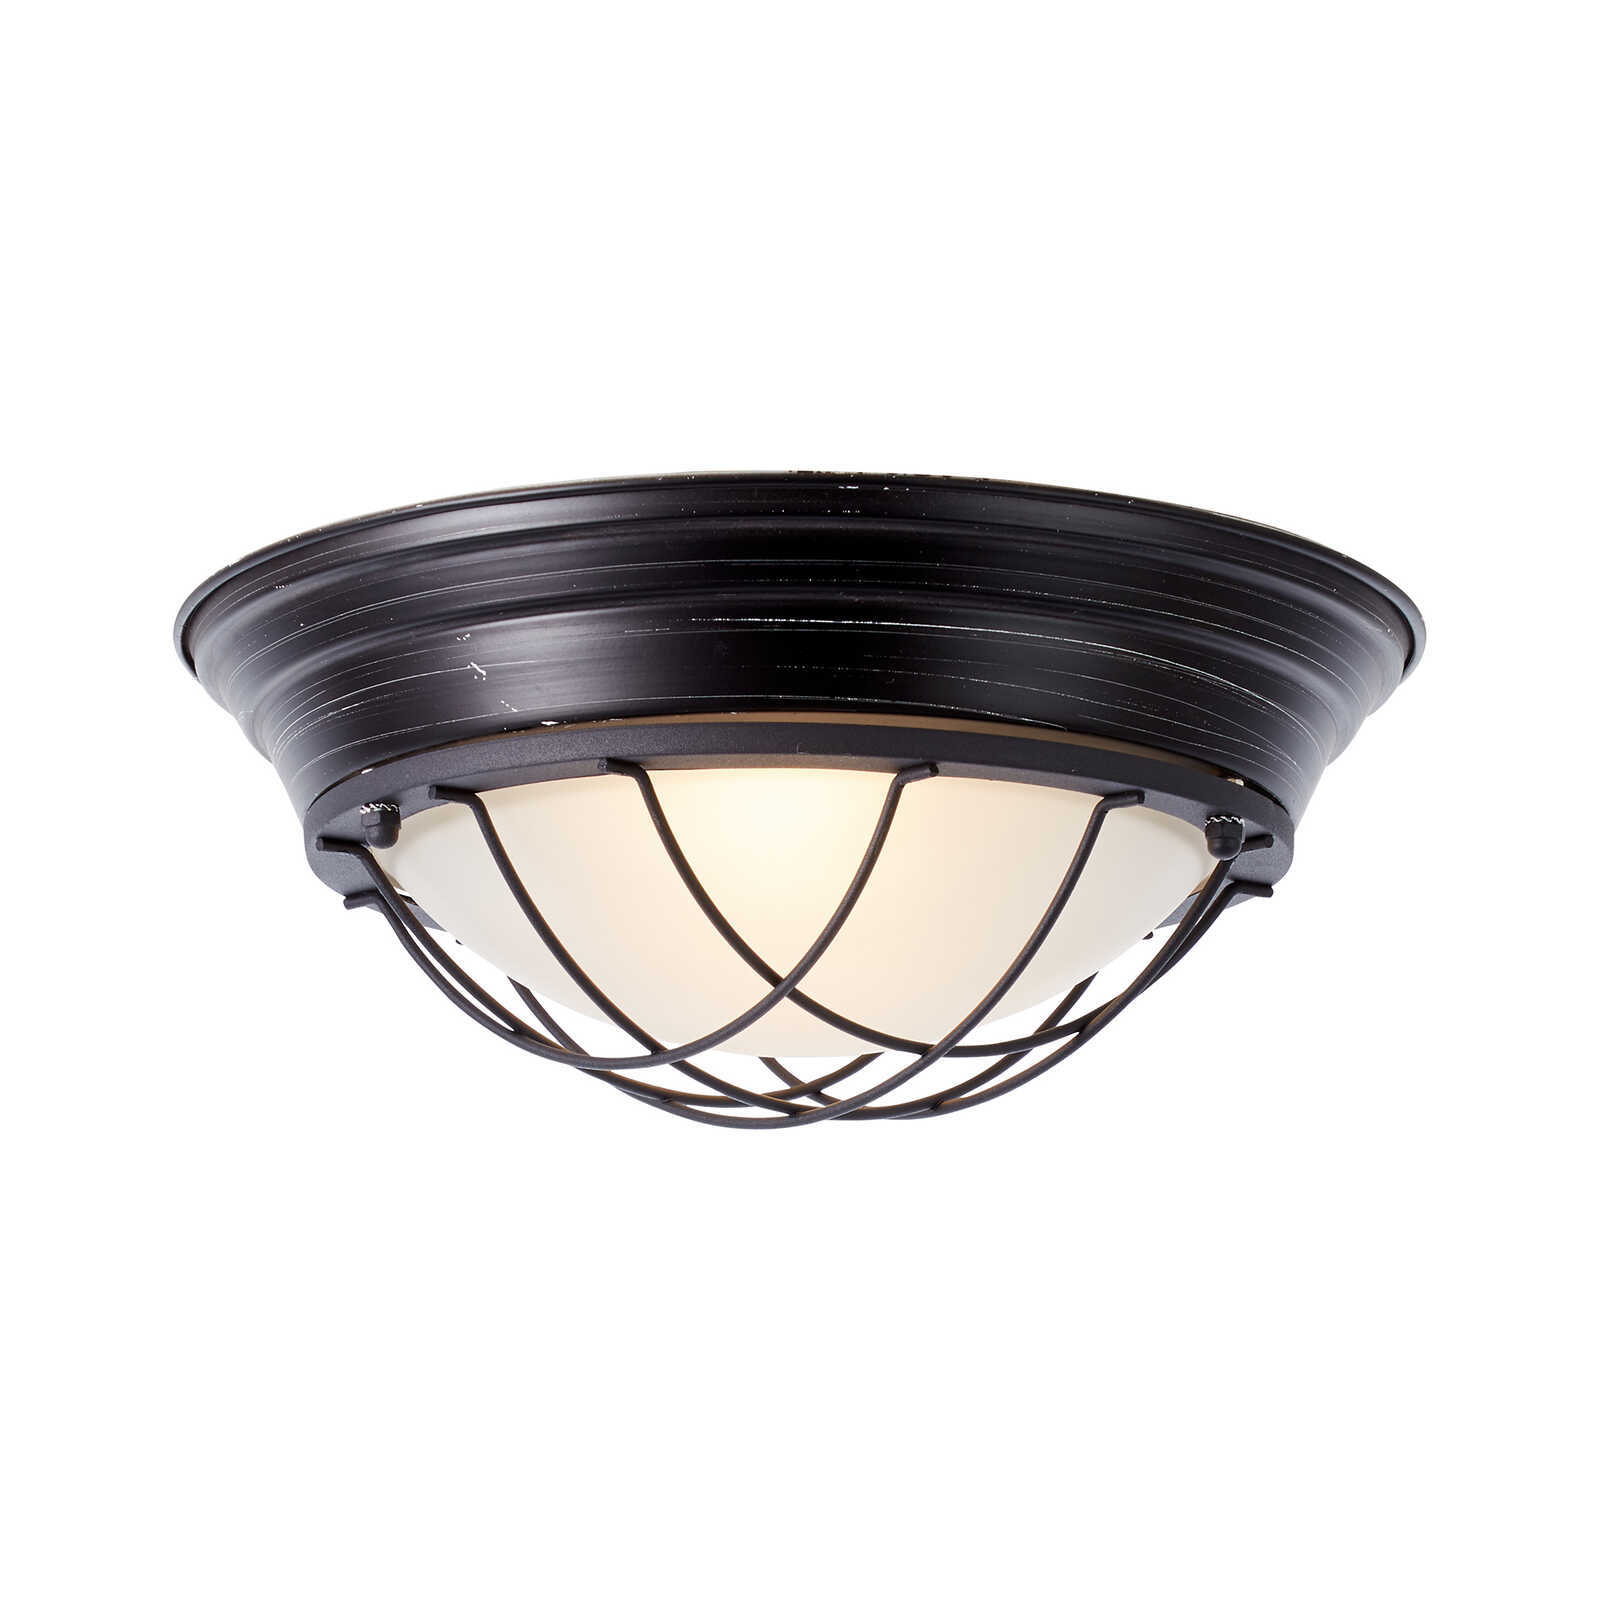 Glass wall and ceiling light - Sina 1 - Black
